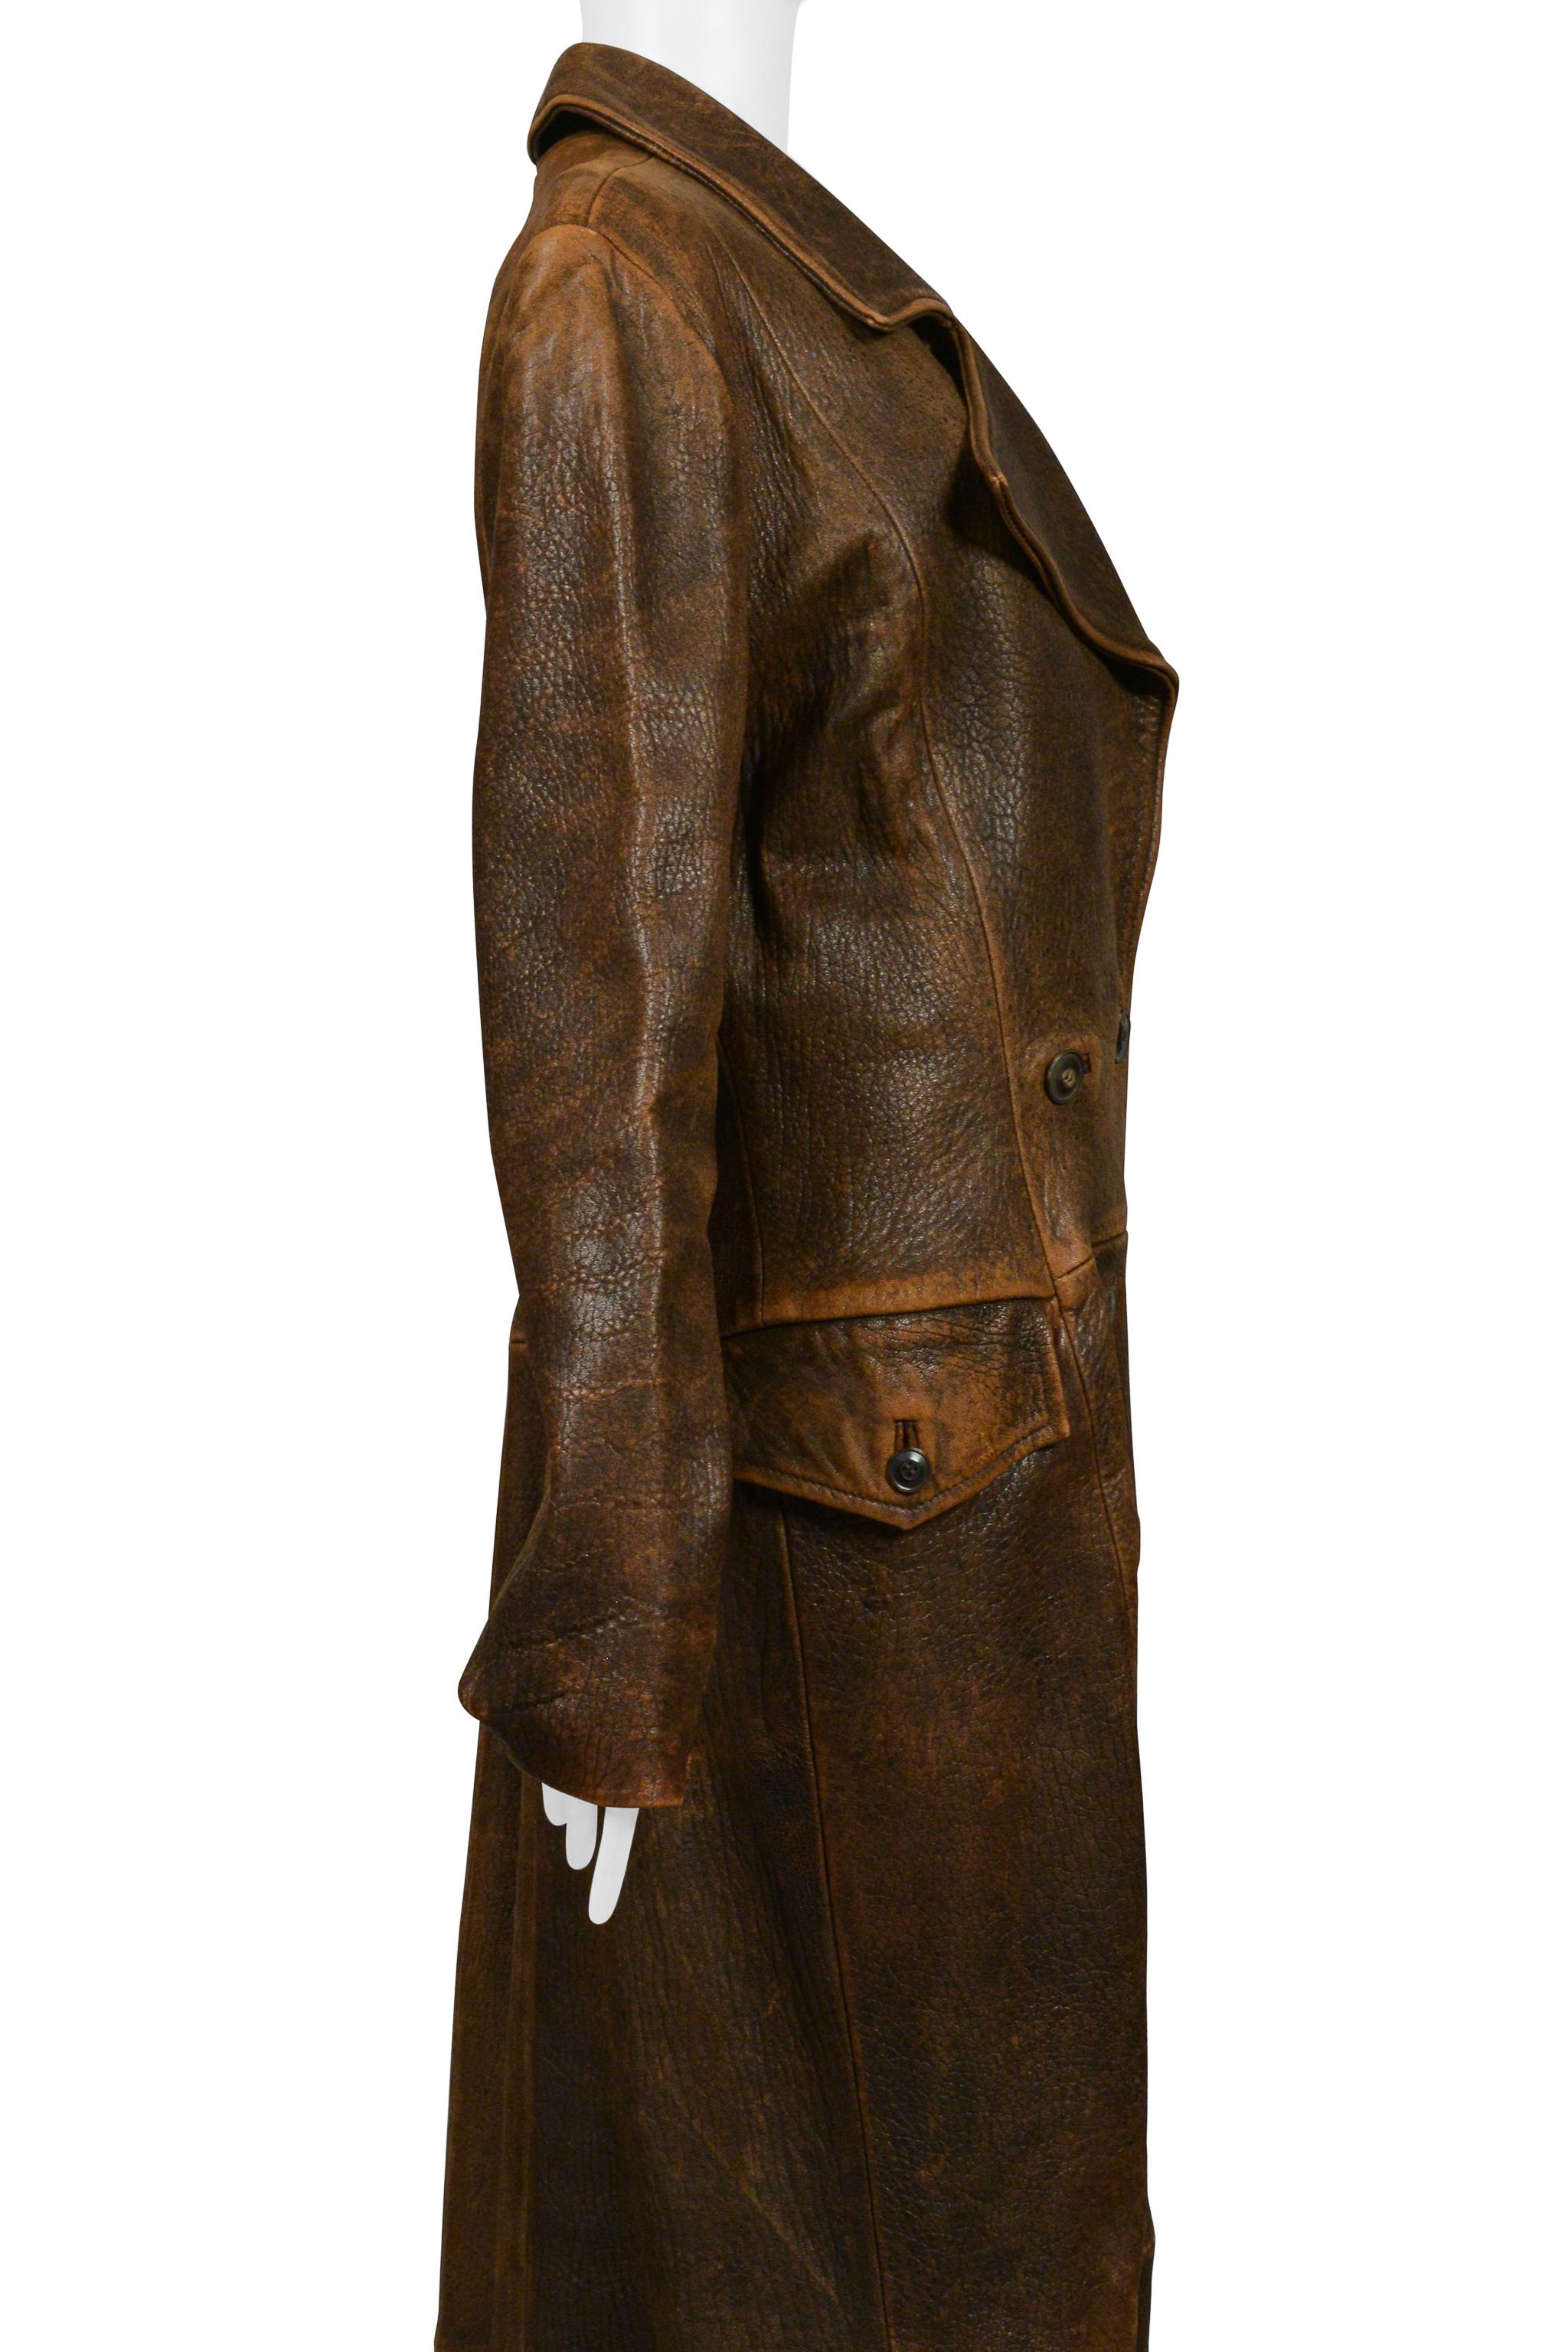 North Beach Leather Brown Distressed Duster For Sale 3